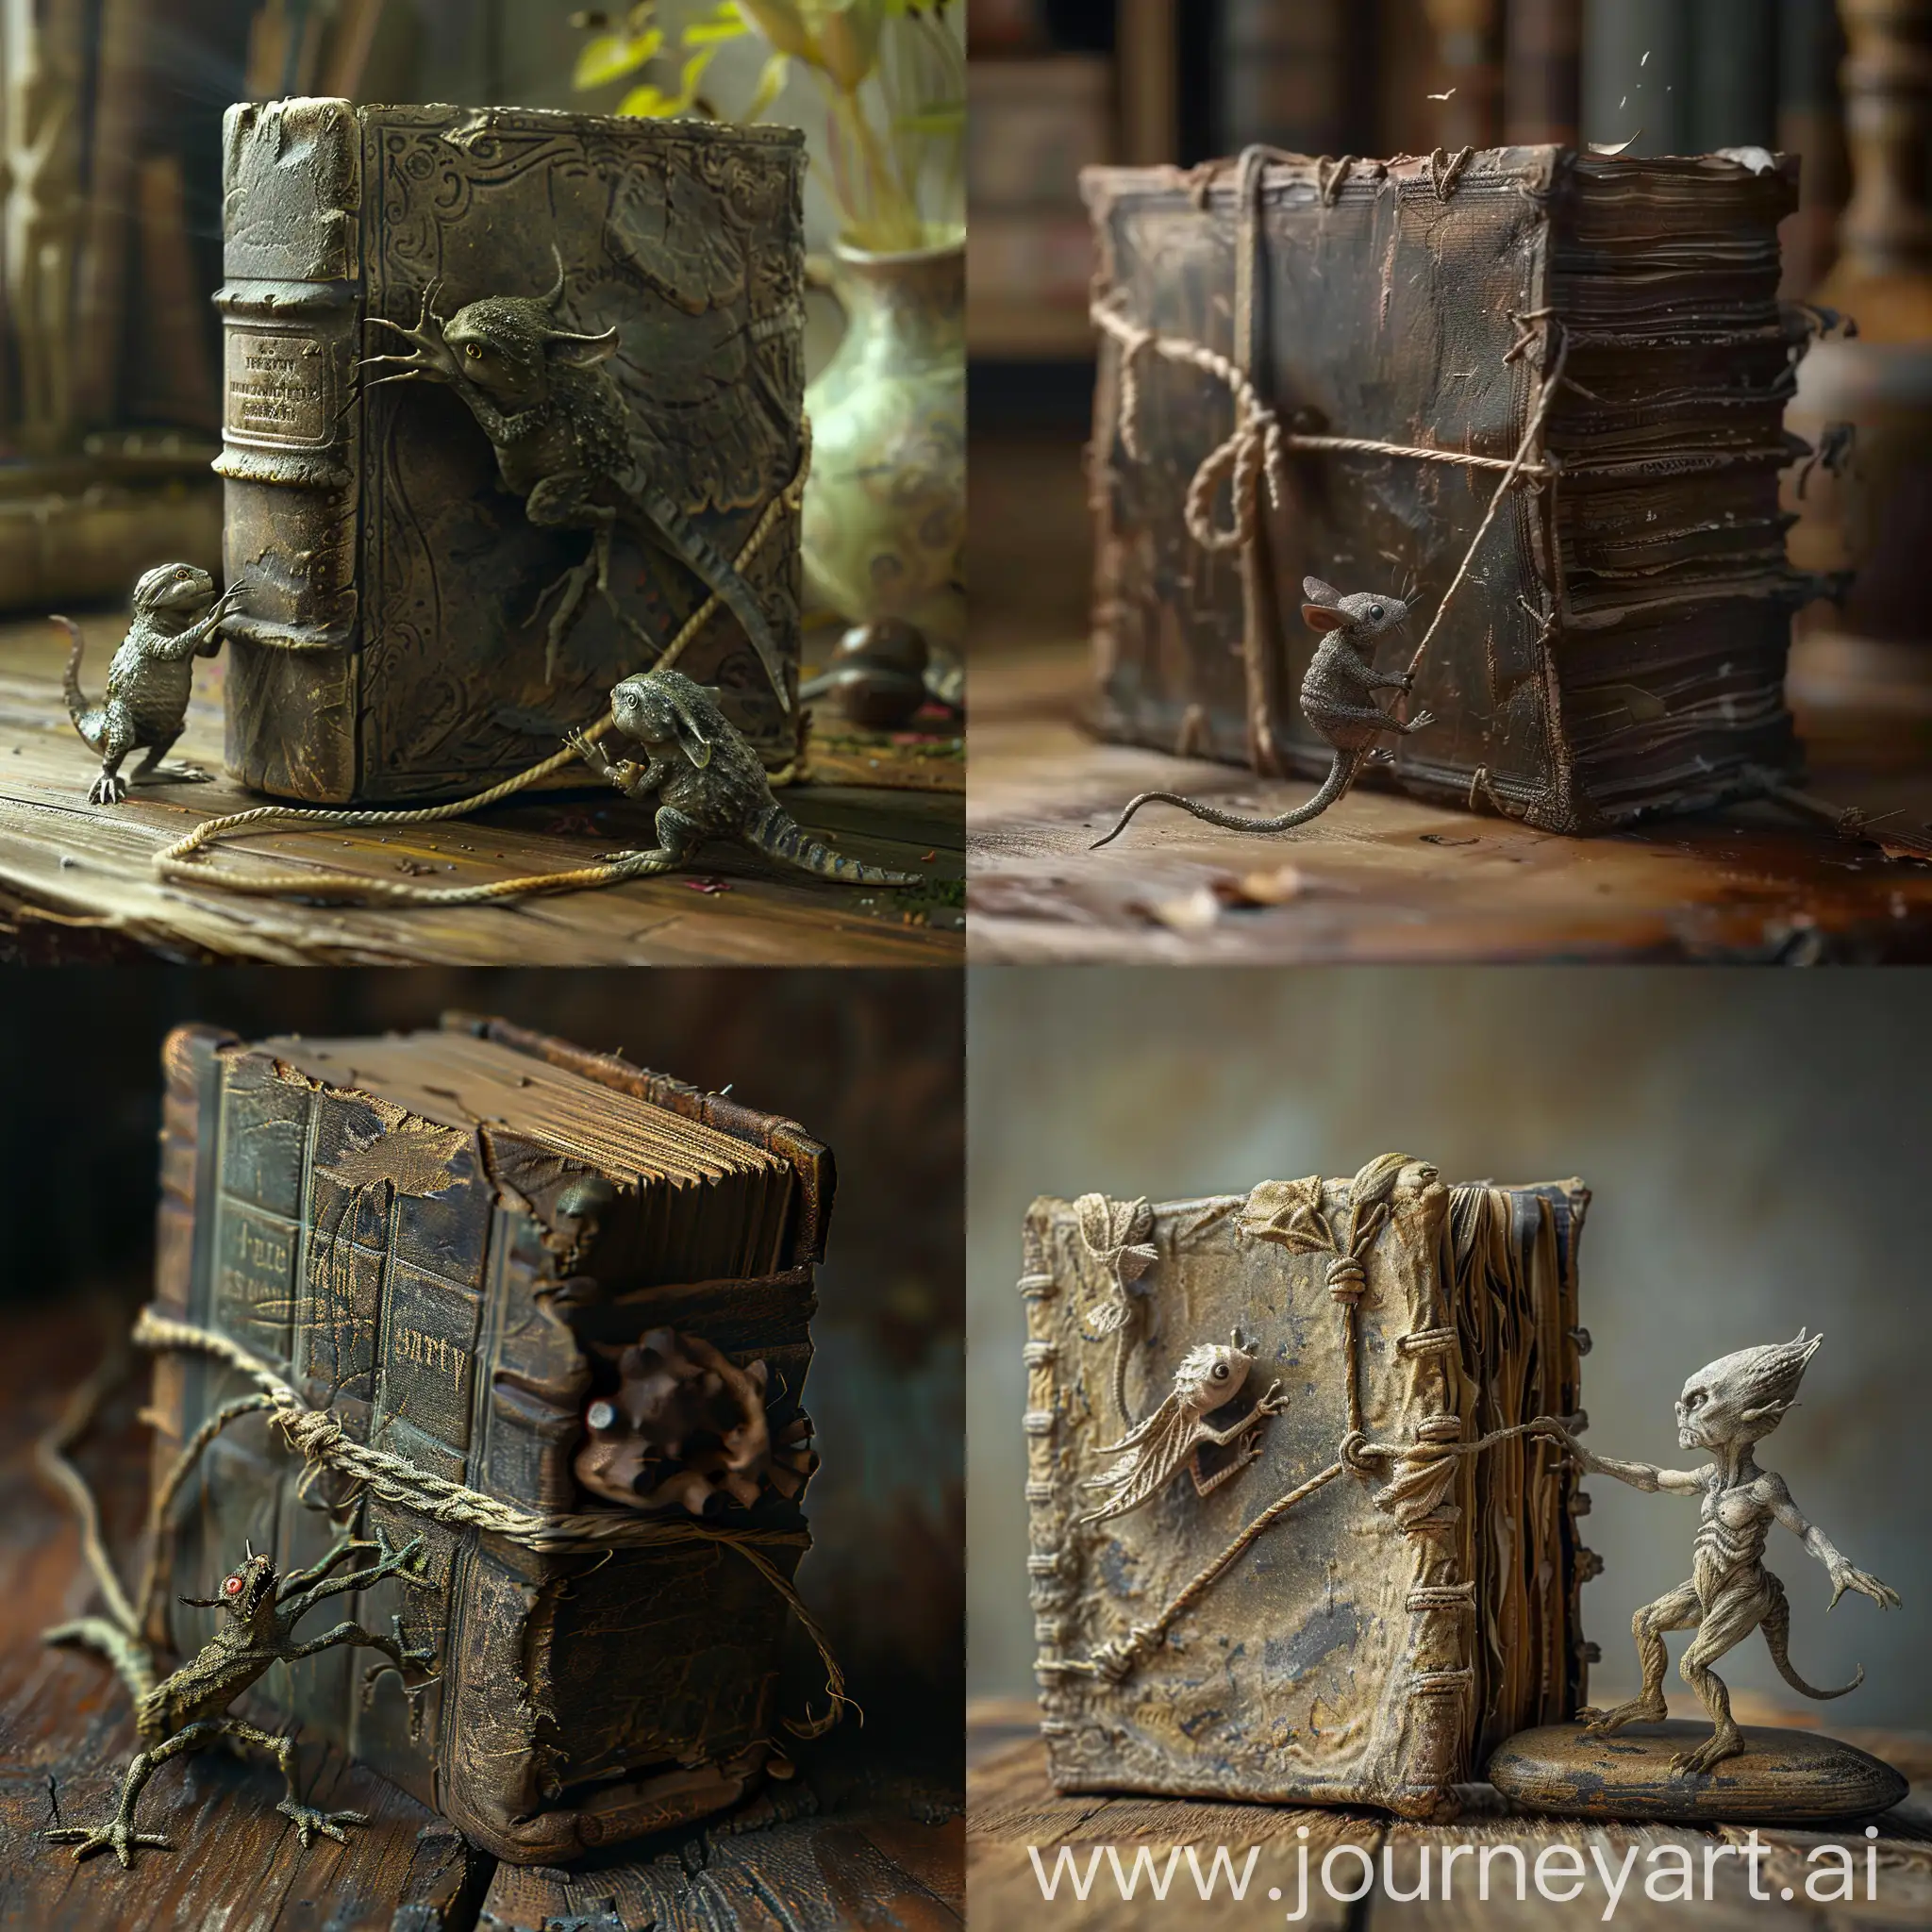 Detailed-Scene-of-Tiny-Creature-Opening-Old-LeatherBound-Book-on-Wooden-Table